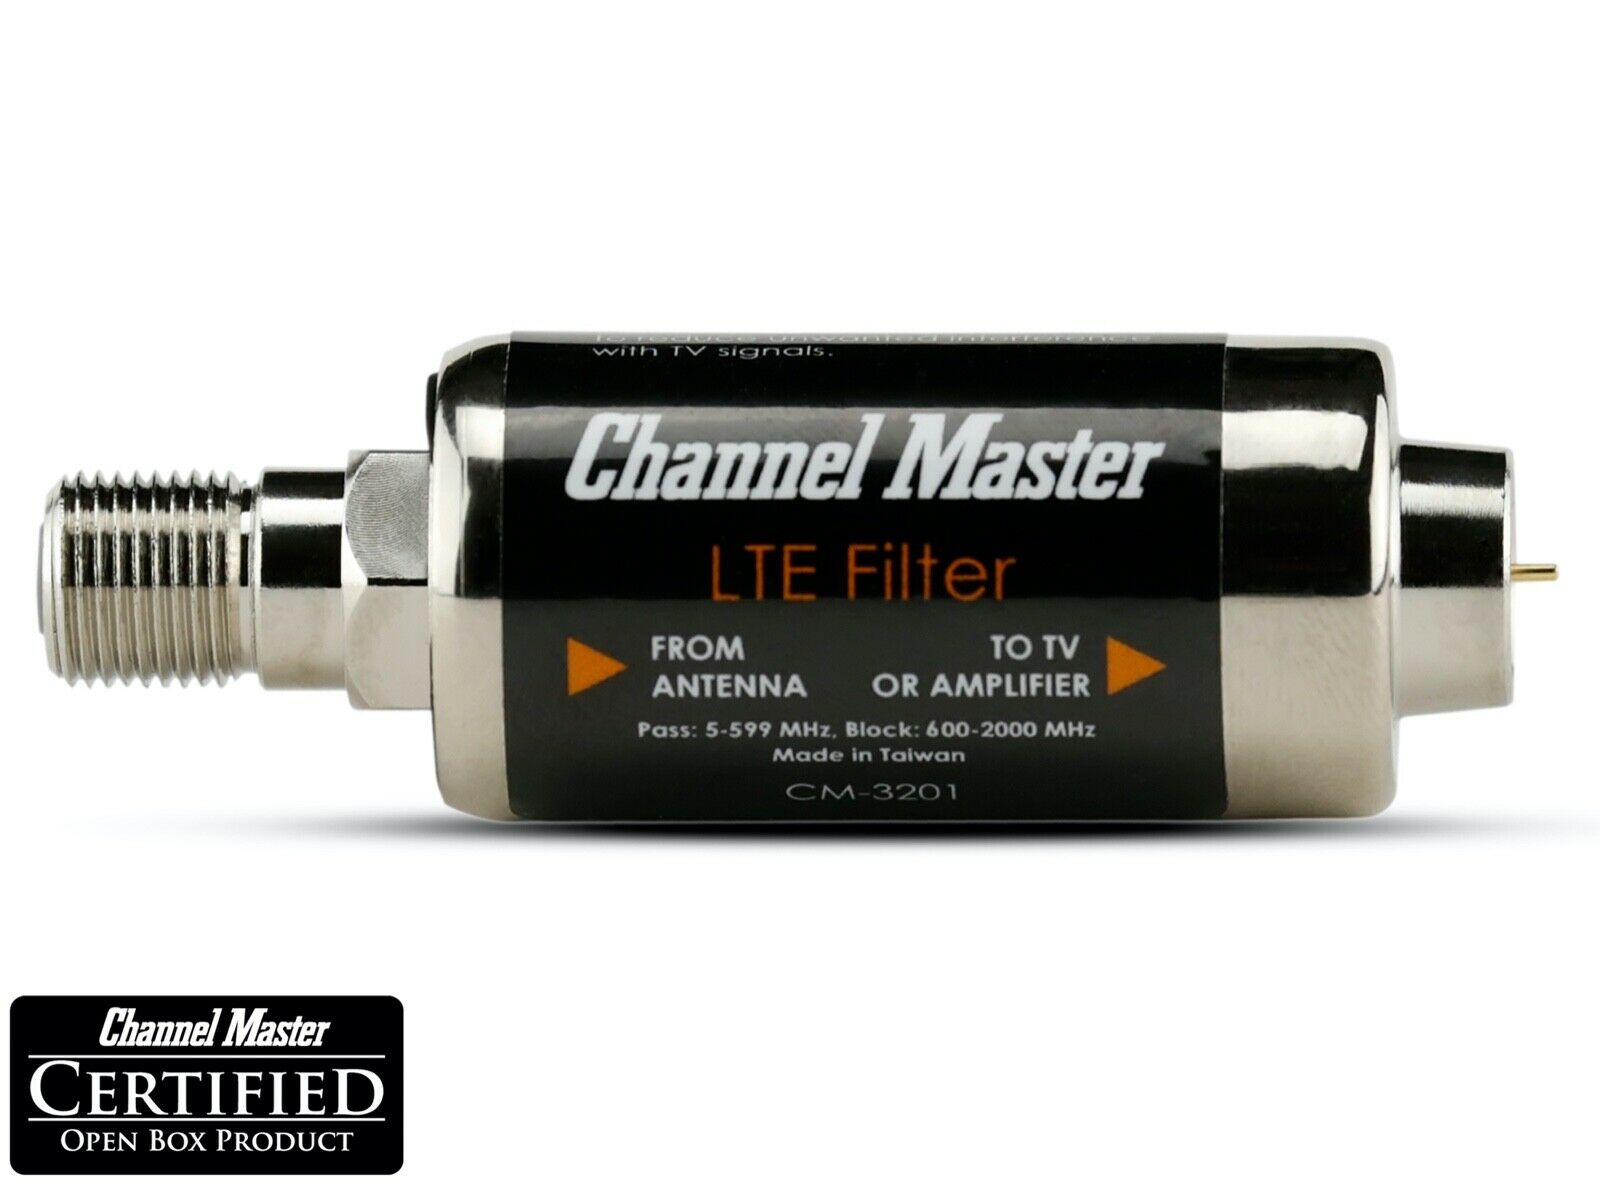 Channel Master Lte Filter Improves Tv Antenna Signals No Interference Cm-3201